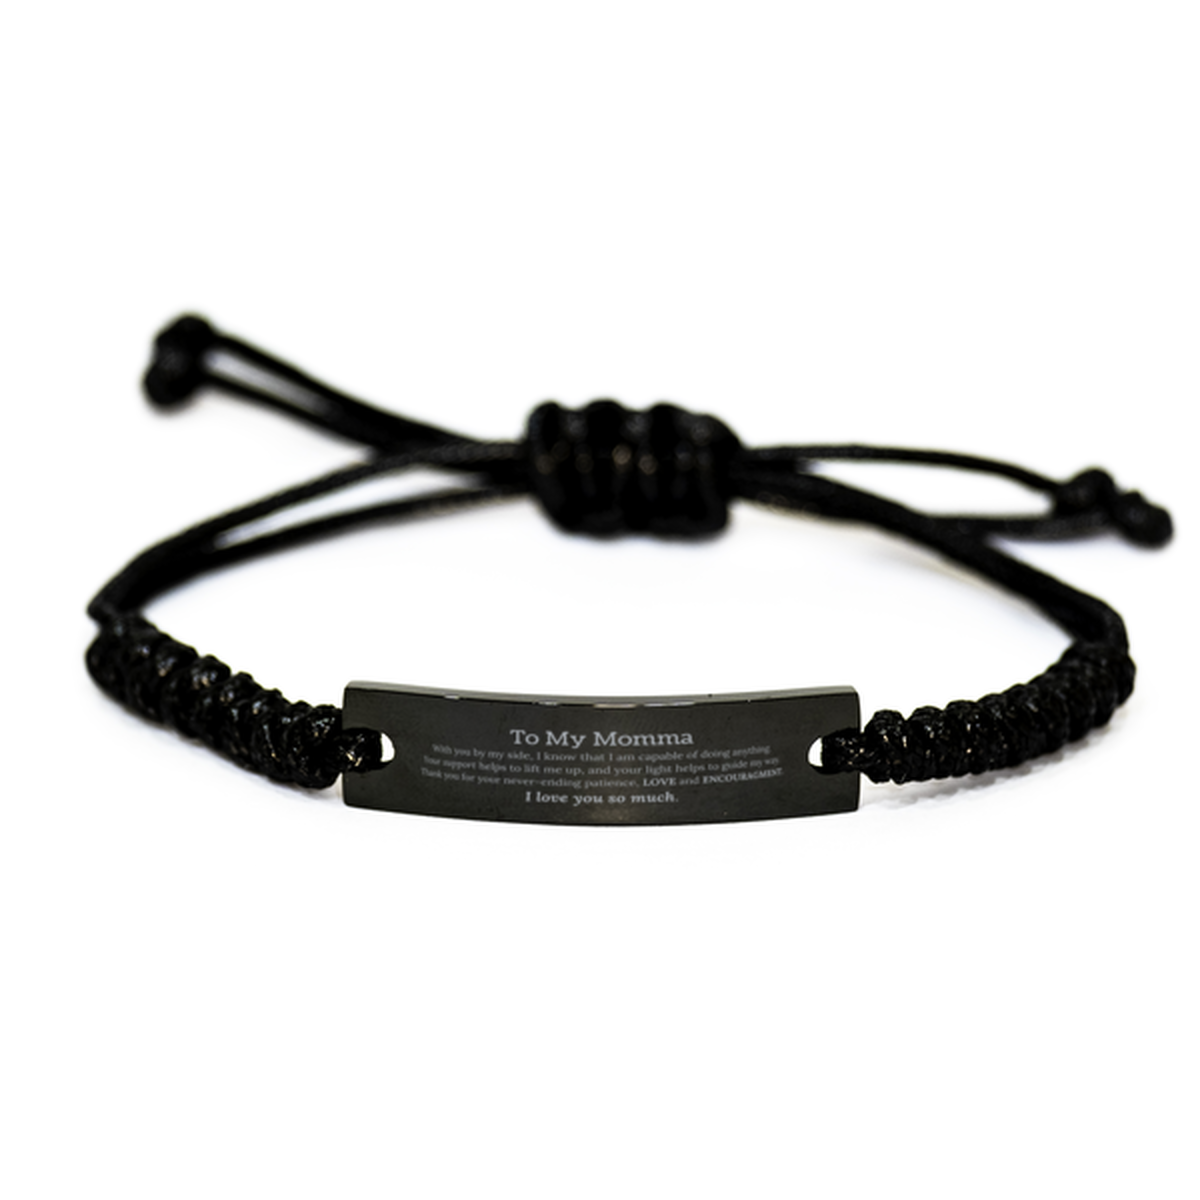 Appreciation Momma Black Rope Bracelet Gifts, To My Momma Birthday Christmas Wedding Keepsake Gifts for Momma With you by my side, I know that I am capable of doing anything. I love you so much